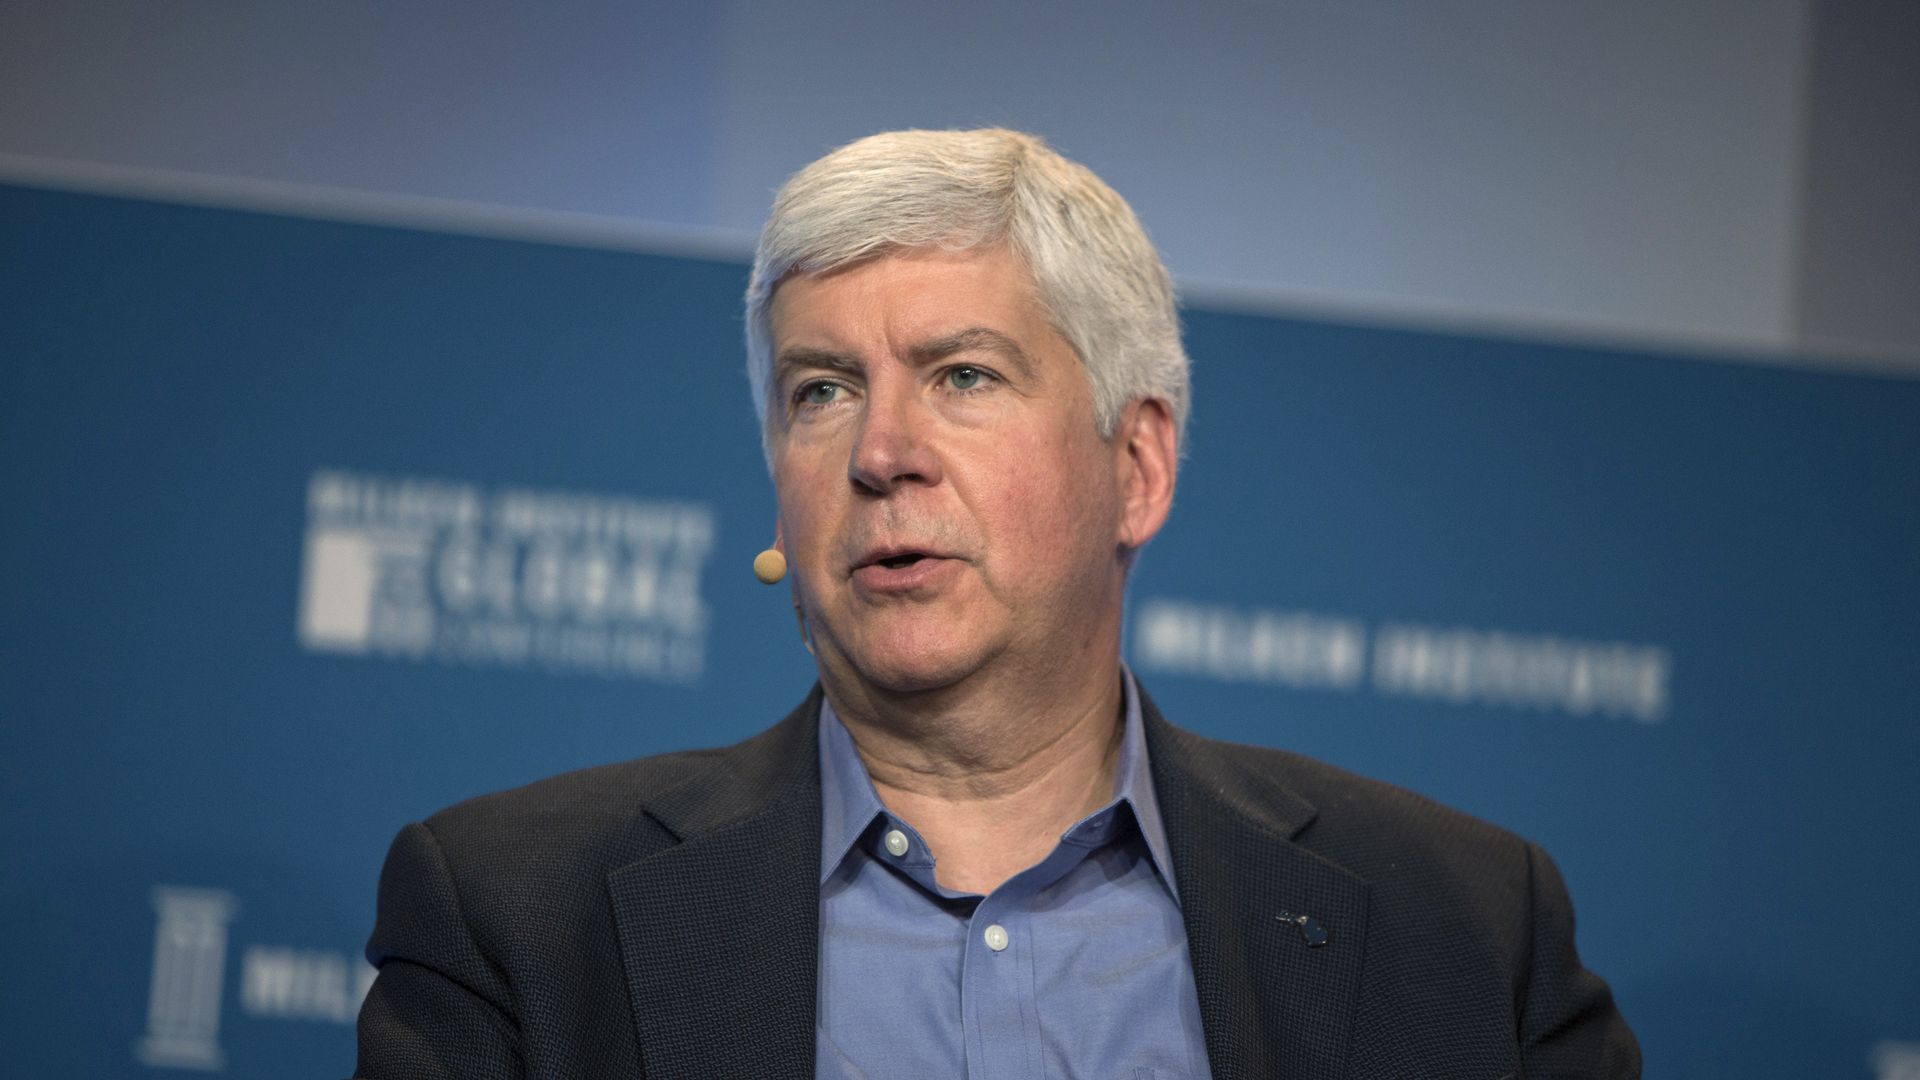 Rick Snyder, governor of Michigan, speaks during the Milken Institute Global Conference in Beverly Hills, California, U.S., on Monday, April 30, 2018.